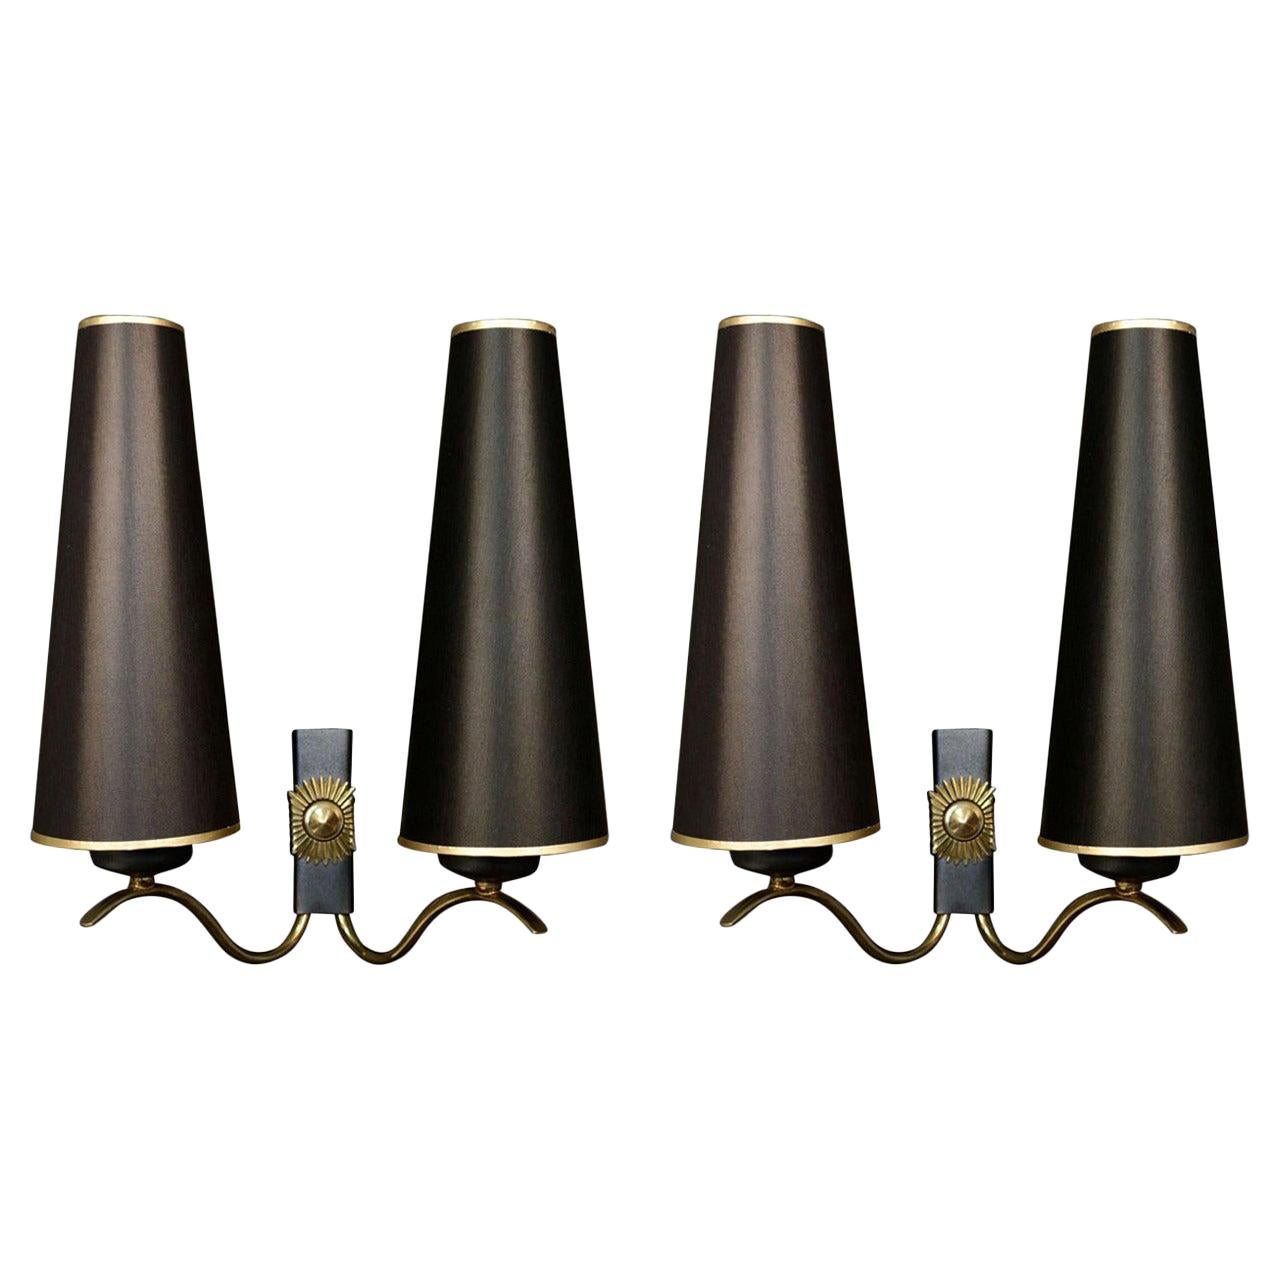 1950 Pair of 'Sun' wall lights from Maison Arlus